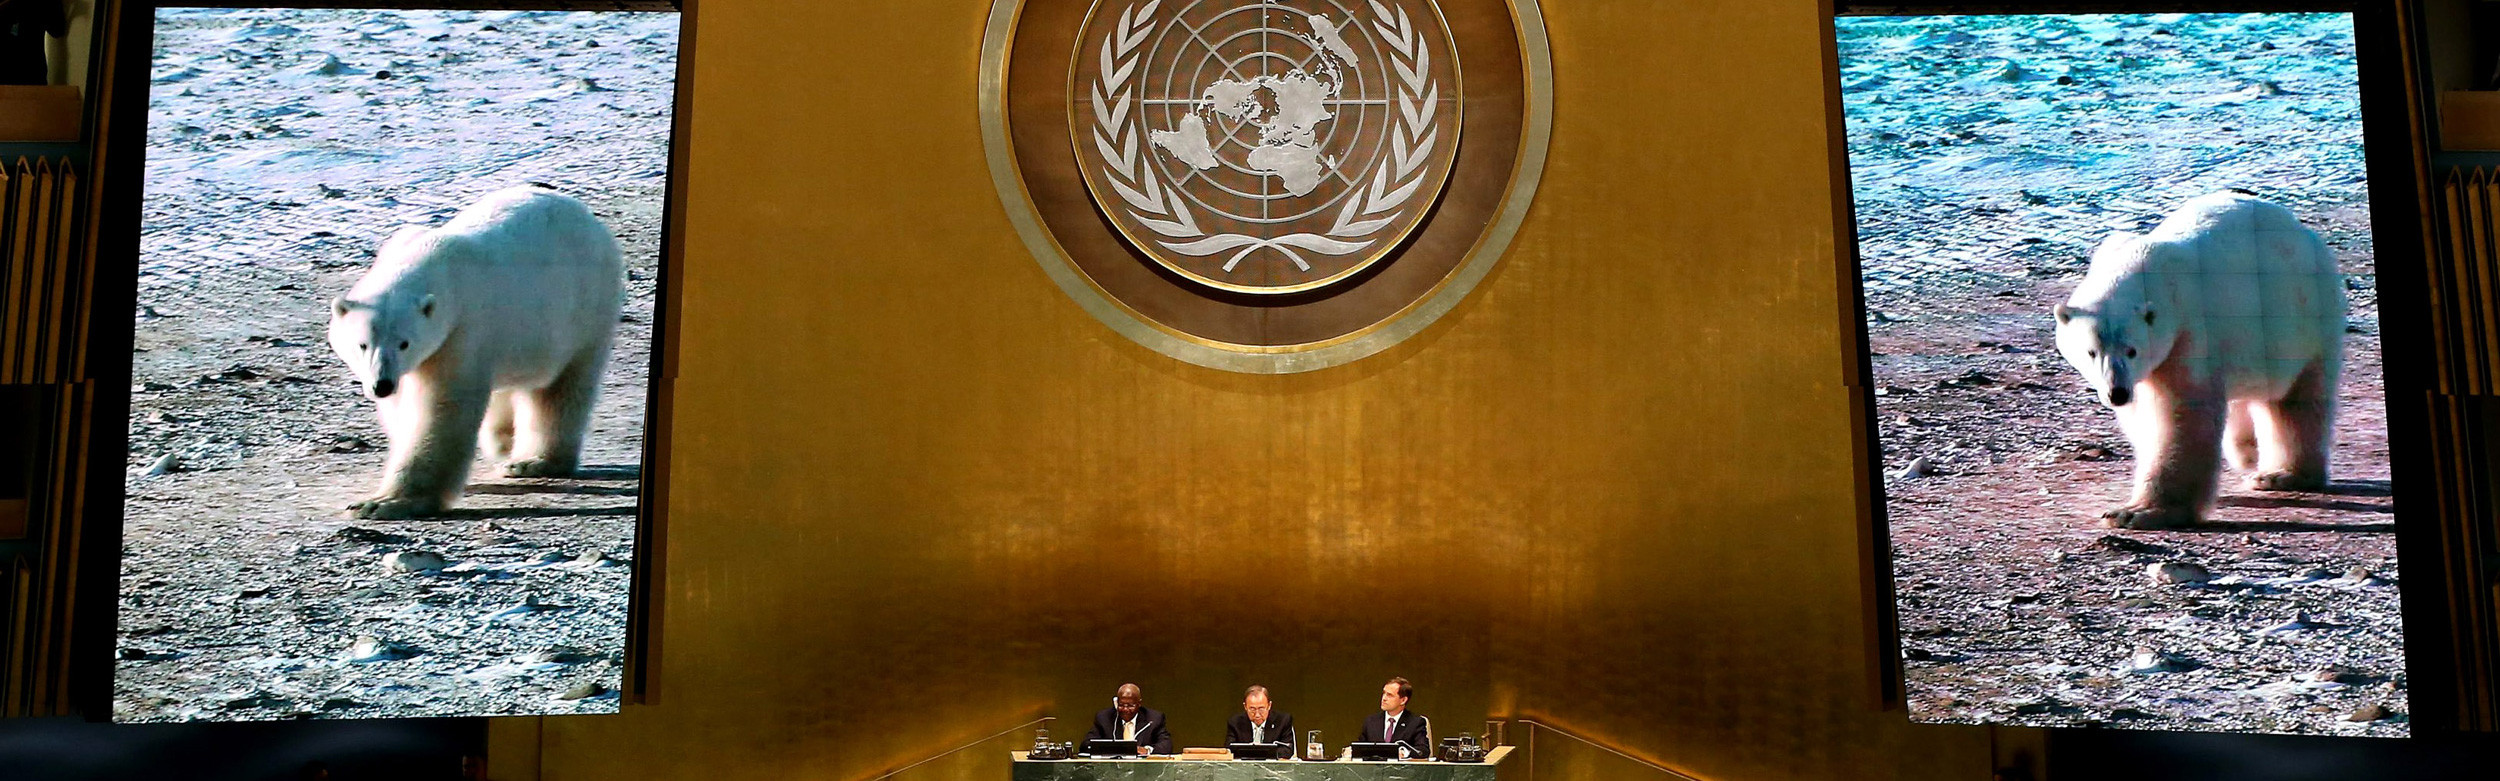 Photo at the UN Climate Summit, with three men sitting in the middle and two screens projecting a photo of a polar bear.